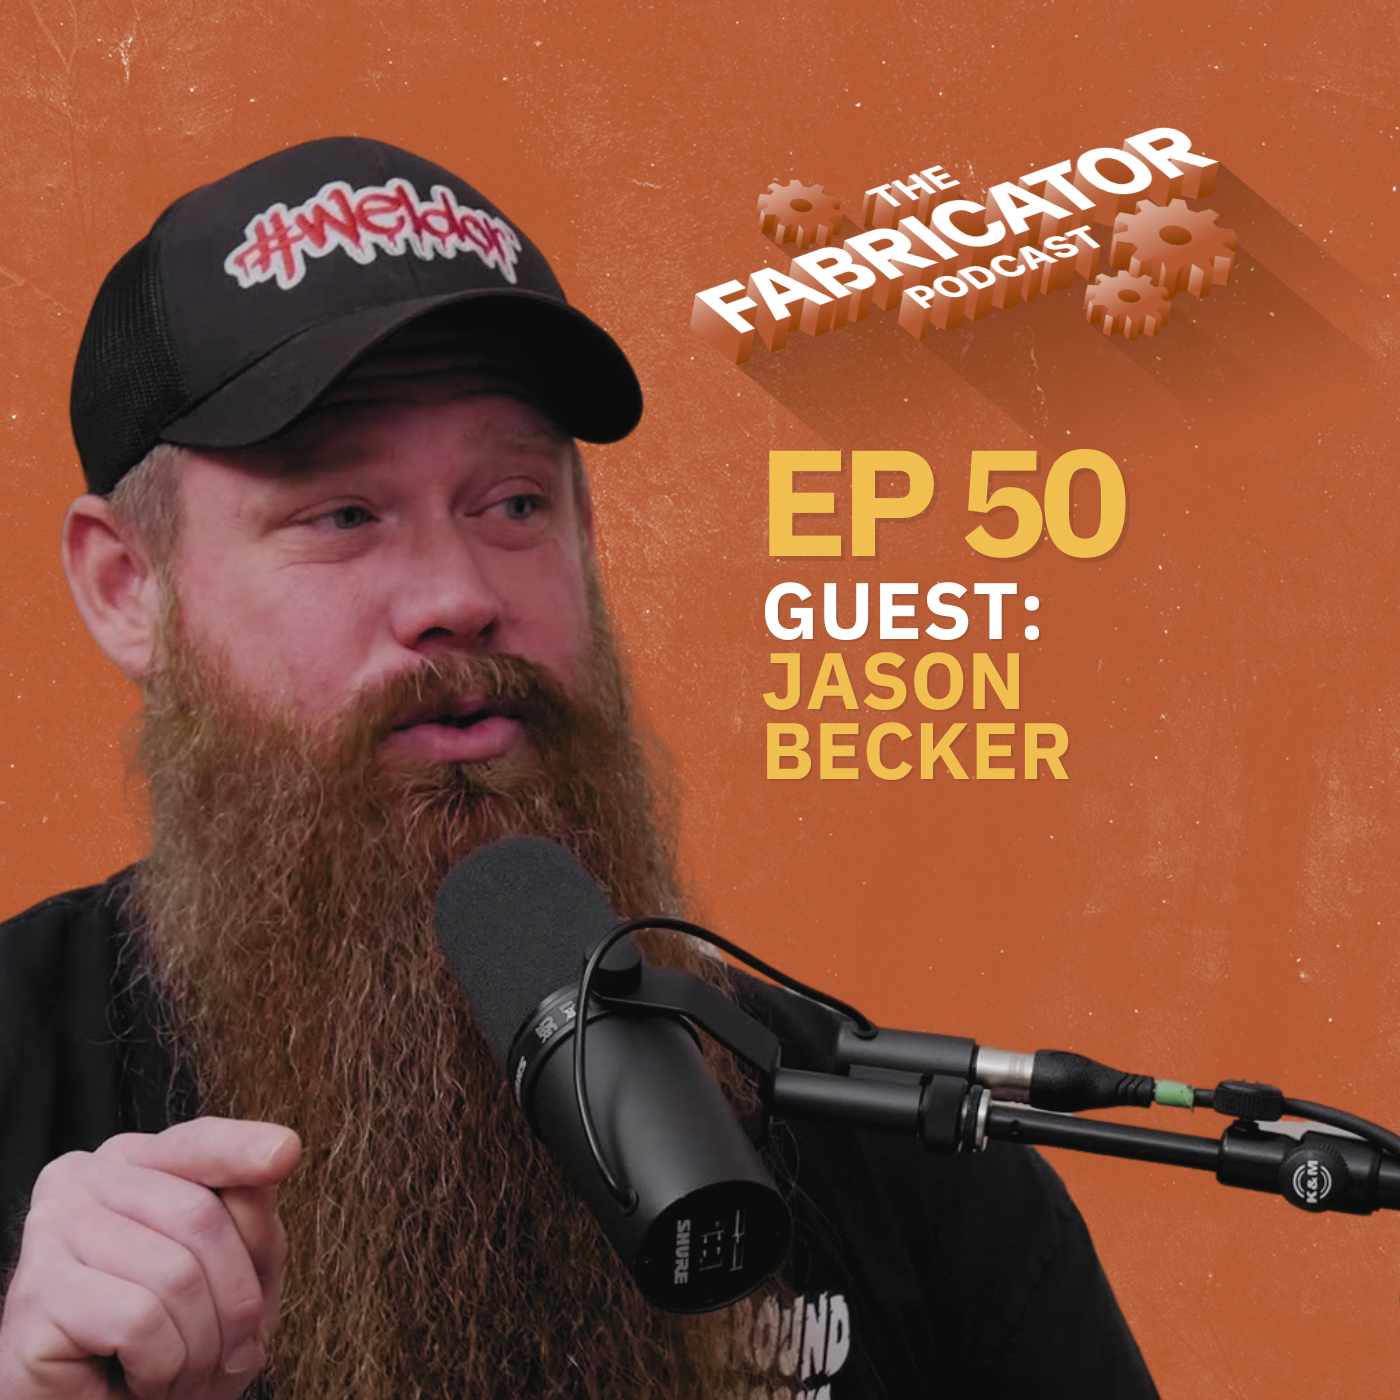 Welding, teaching, podcasting, and business ownership with Jason Becker